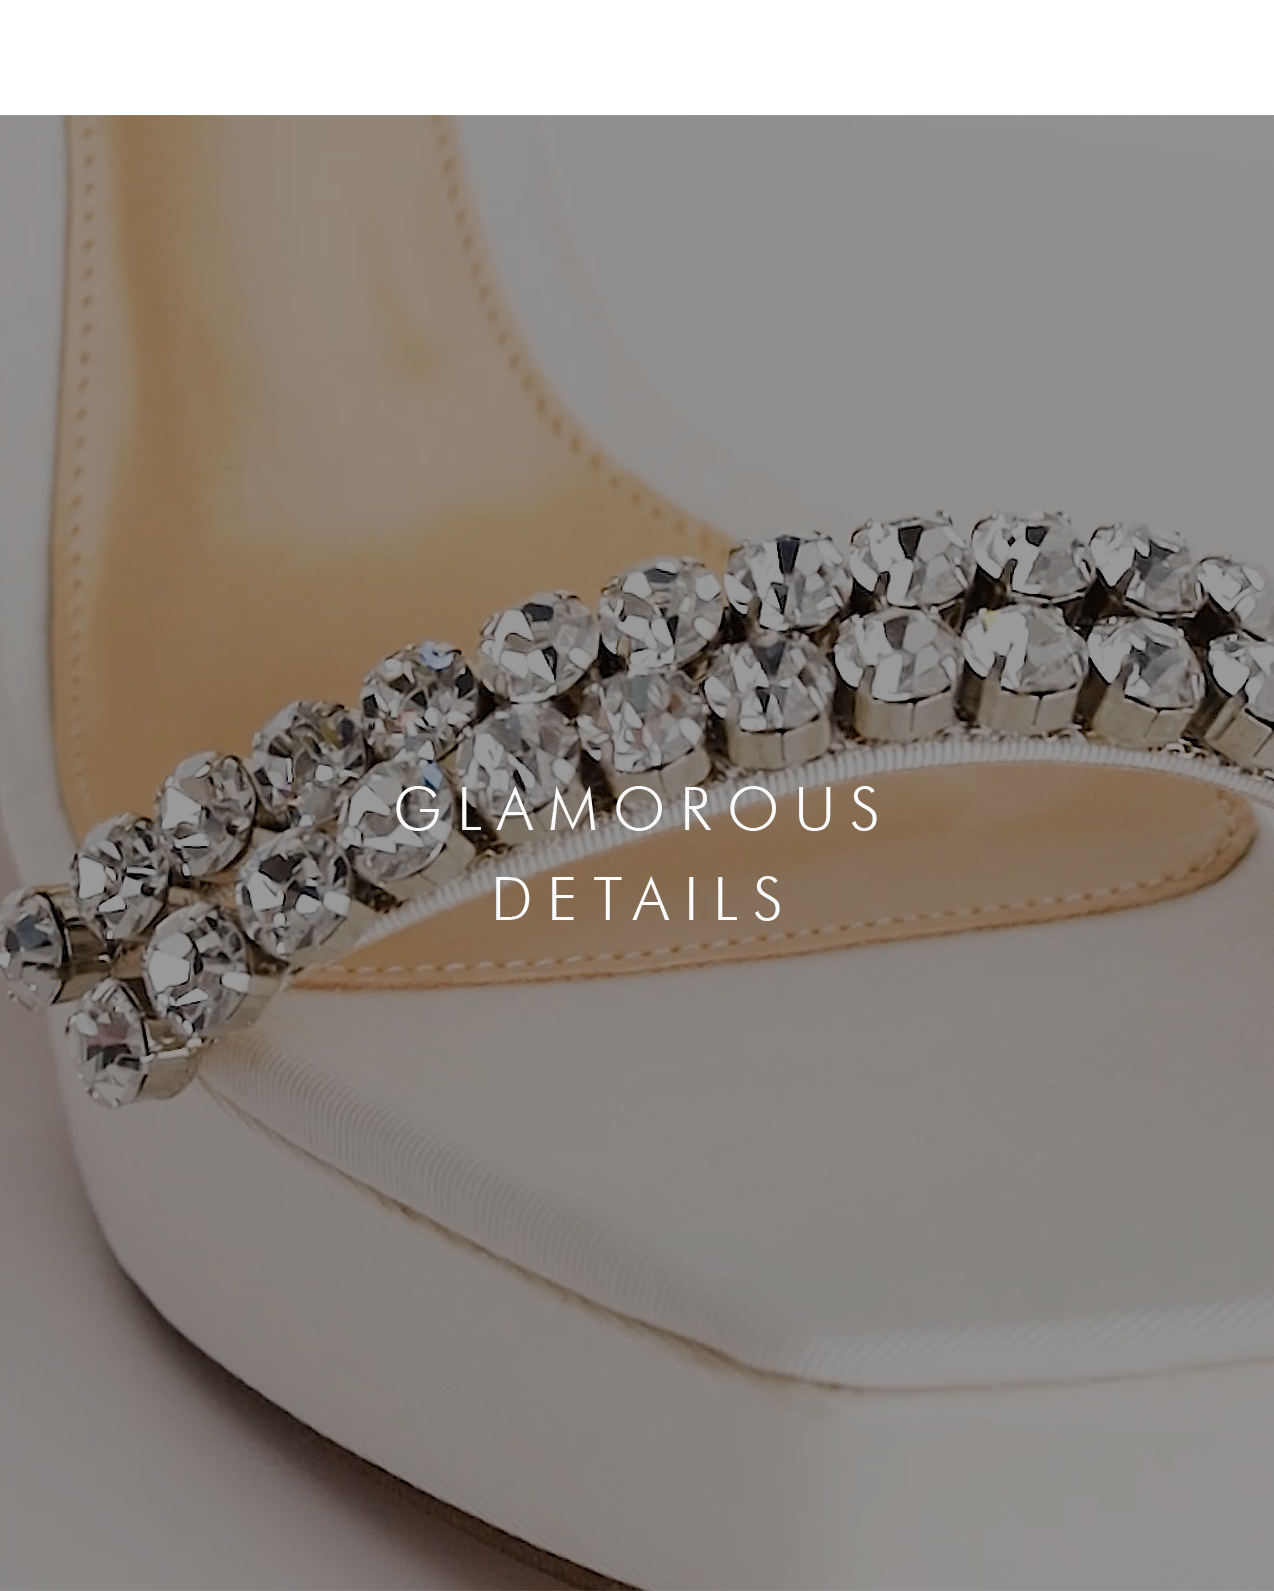 Glamorous Embellishments: Close-up of Agnes 120 Platform Sandal adorned with clear crystals. Text reads 'GLAMOROUS DETAILS.' Elevate your wedding look with luxury and style.